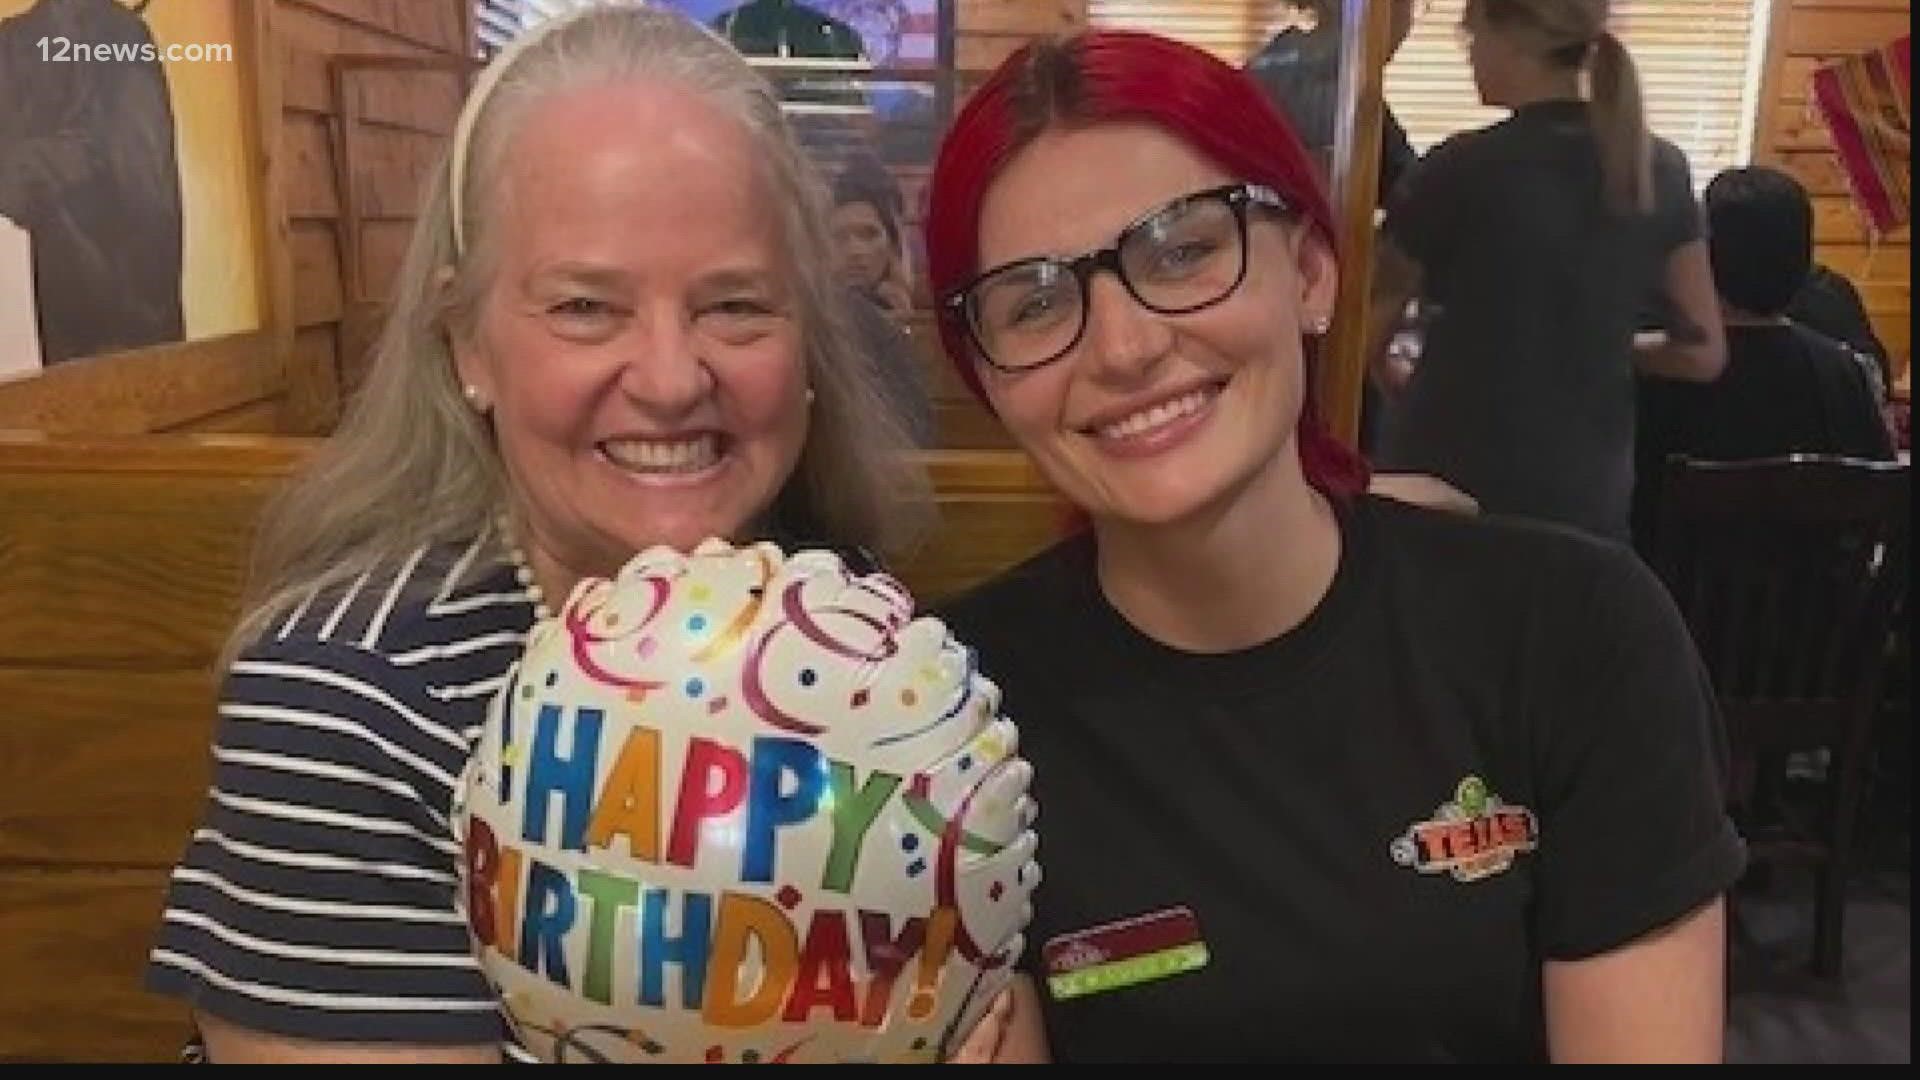 From Florence to Gilbert, this Texas Roadhouse employee and single mom is so committed to serving others, she sees her gas bill climb sky-high.